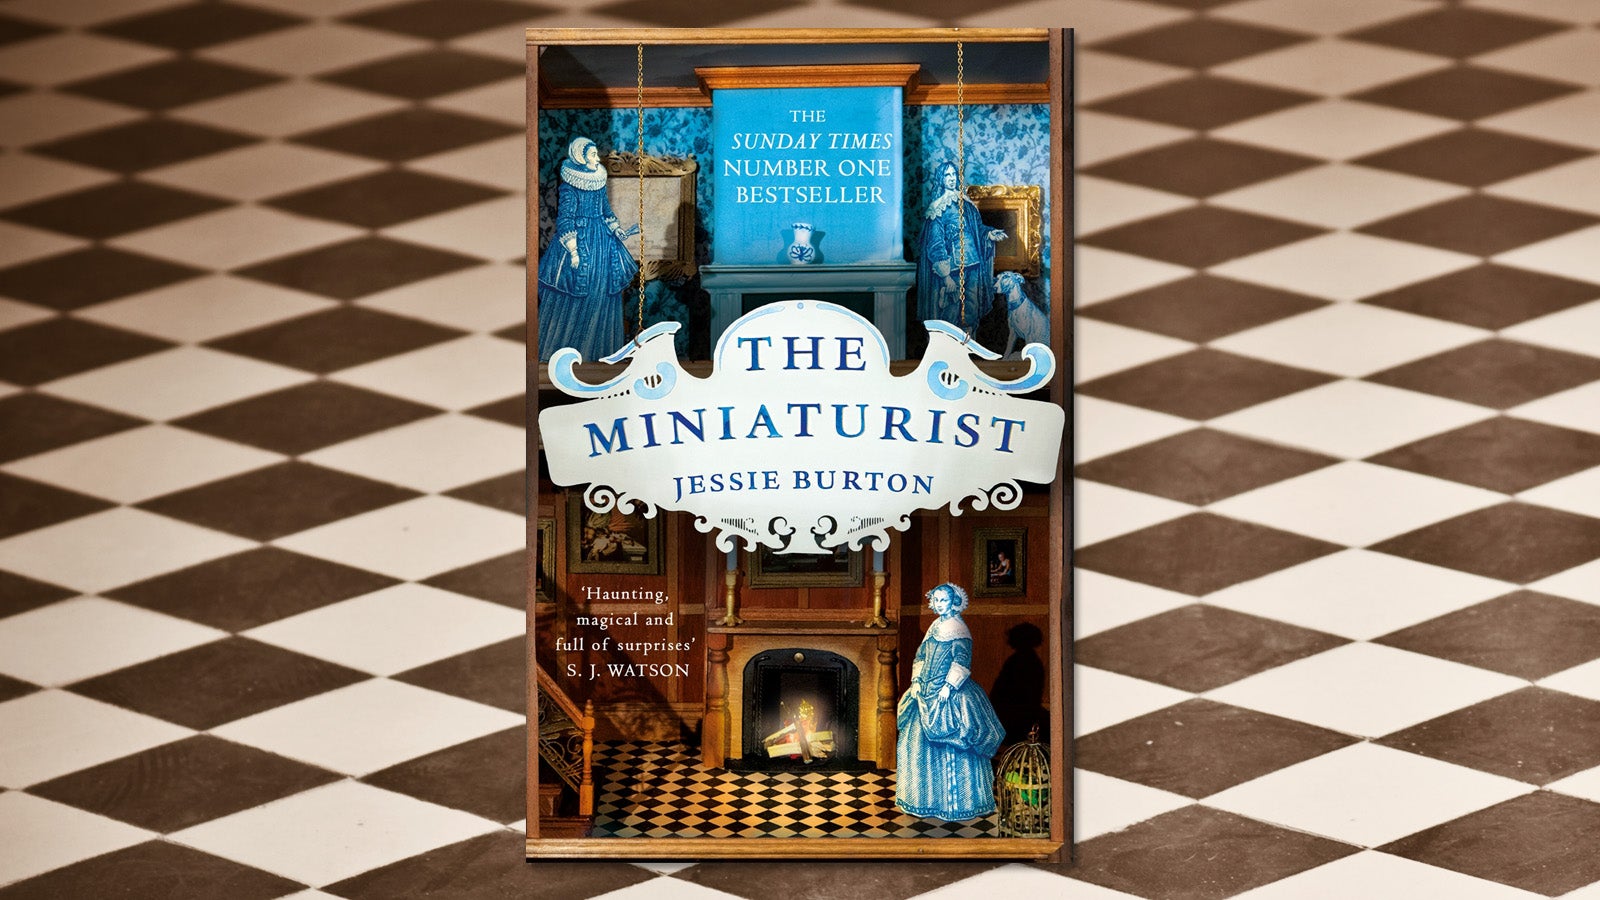 The book cover for The Miniaturist against a tiled floor background